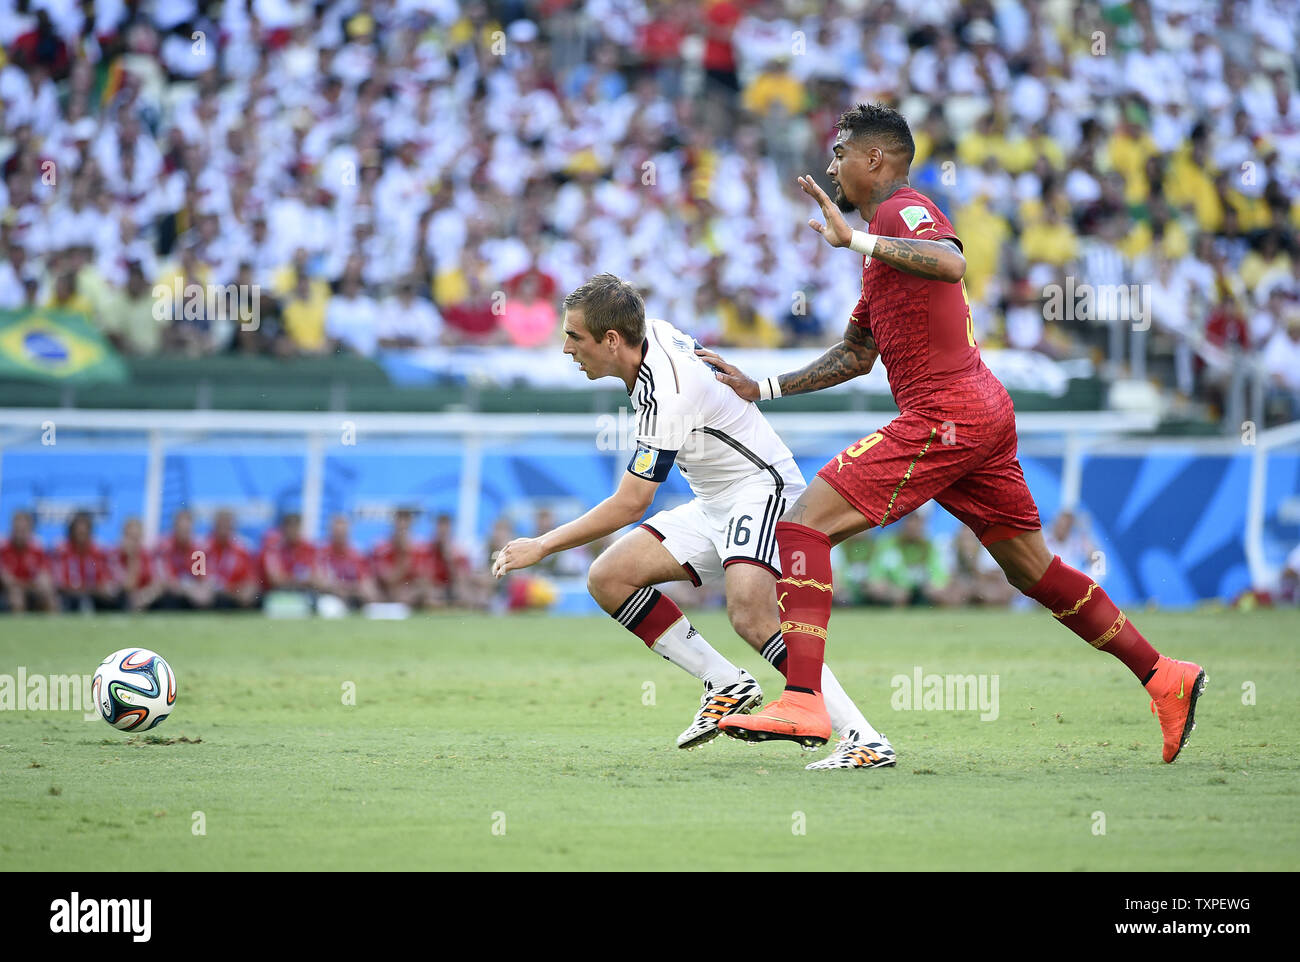 Philipp Lahm (L) of Germany competes with Kevin Prince-Boateng of Ghana during the 2014 FIFA World Cup Group G match at the Estadio Castelao in Fortaleza, Brazil on June 21, 2014. UPI/Chris Brunskill Stock Photo